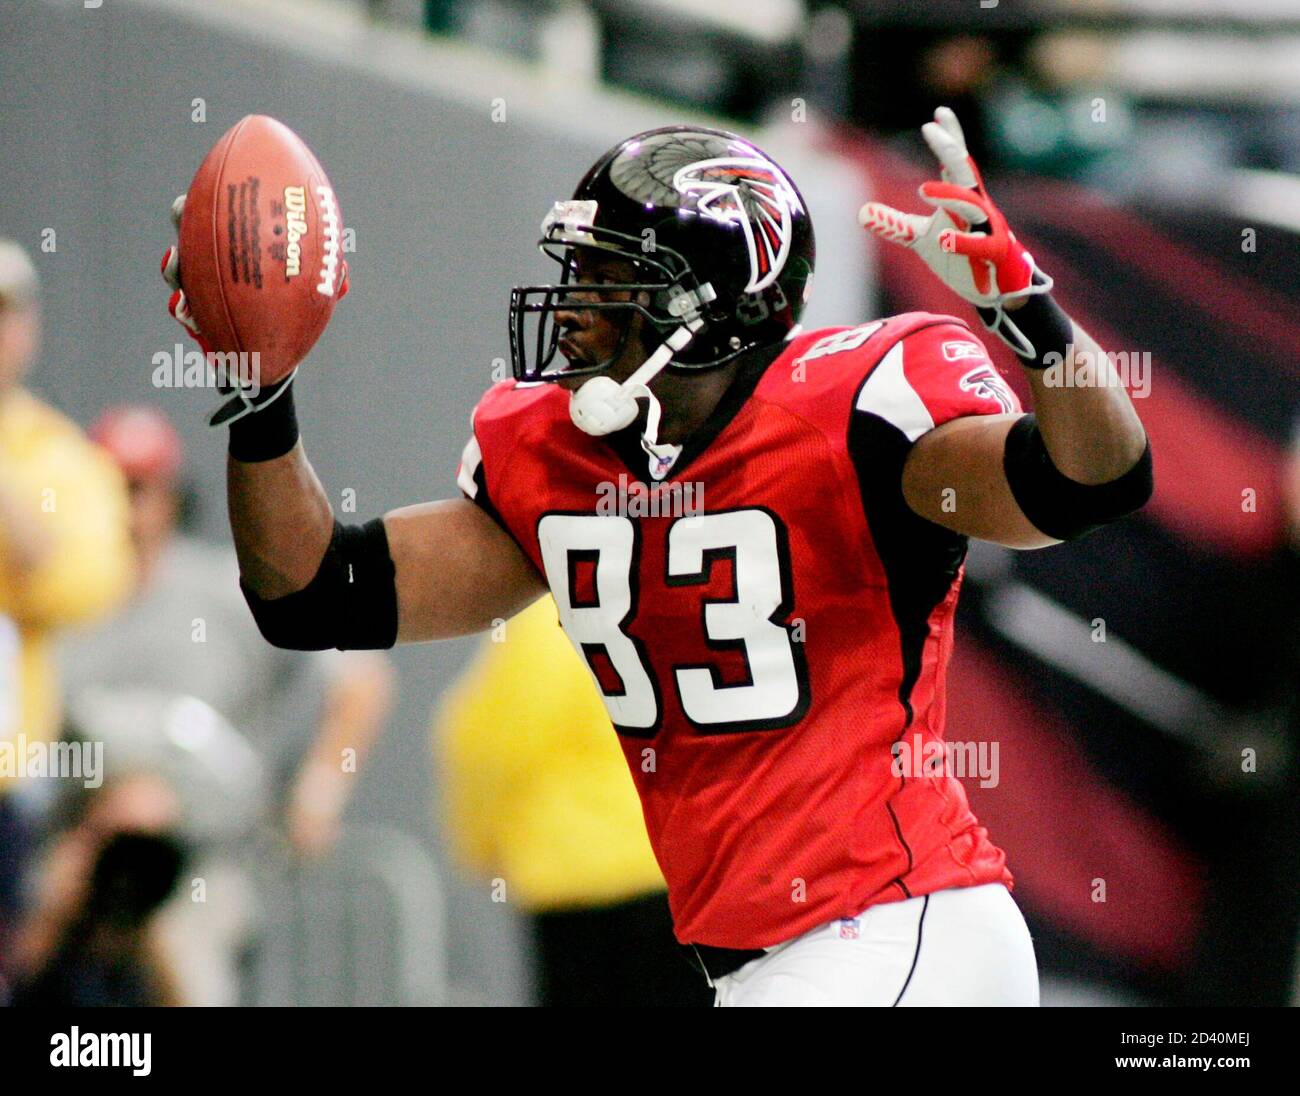 Atlanta Falcons tightend Alge Crumpler celebrates a Falcons touchdown after  scoring past the San Diego Chargers defense in first half NFL action in  Atlanta, Georgia October 17, 2004. REUTERS/Tami Chappell TLC/SV Fotografía